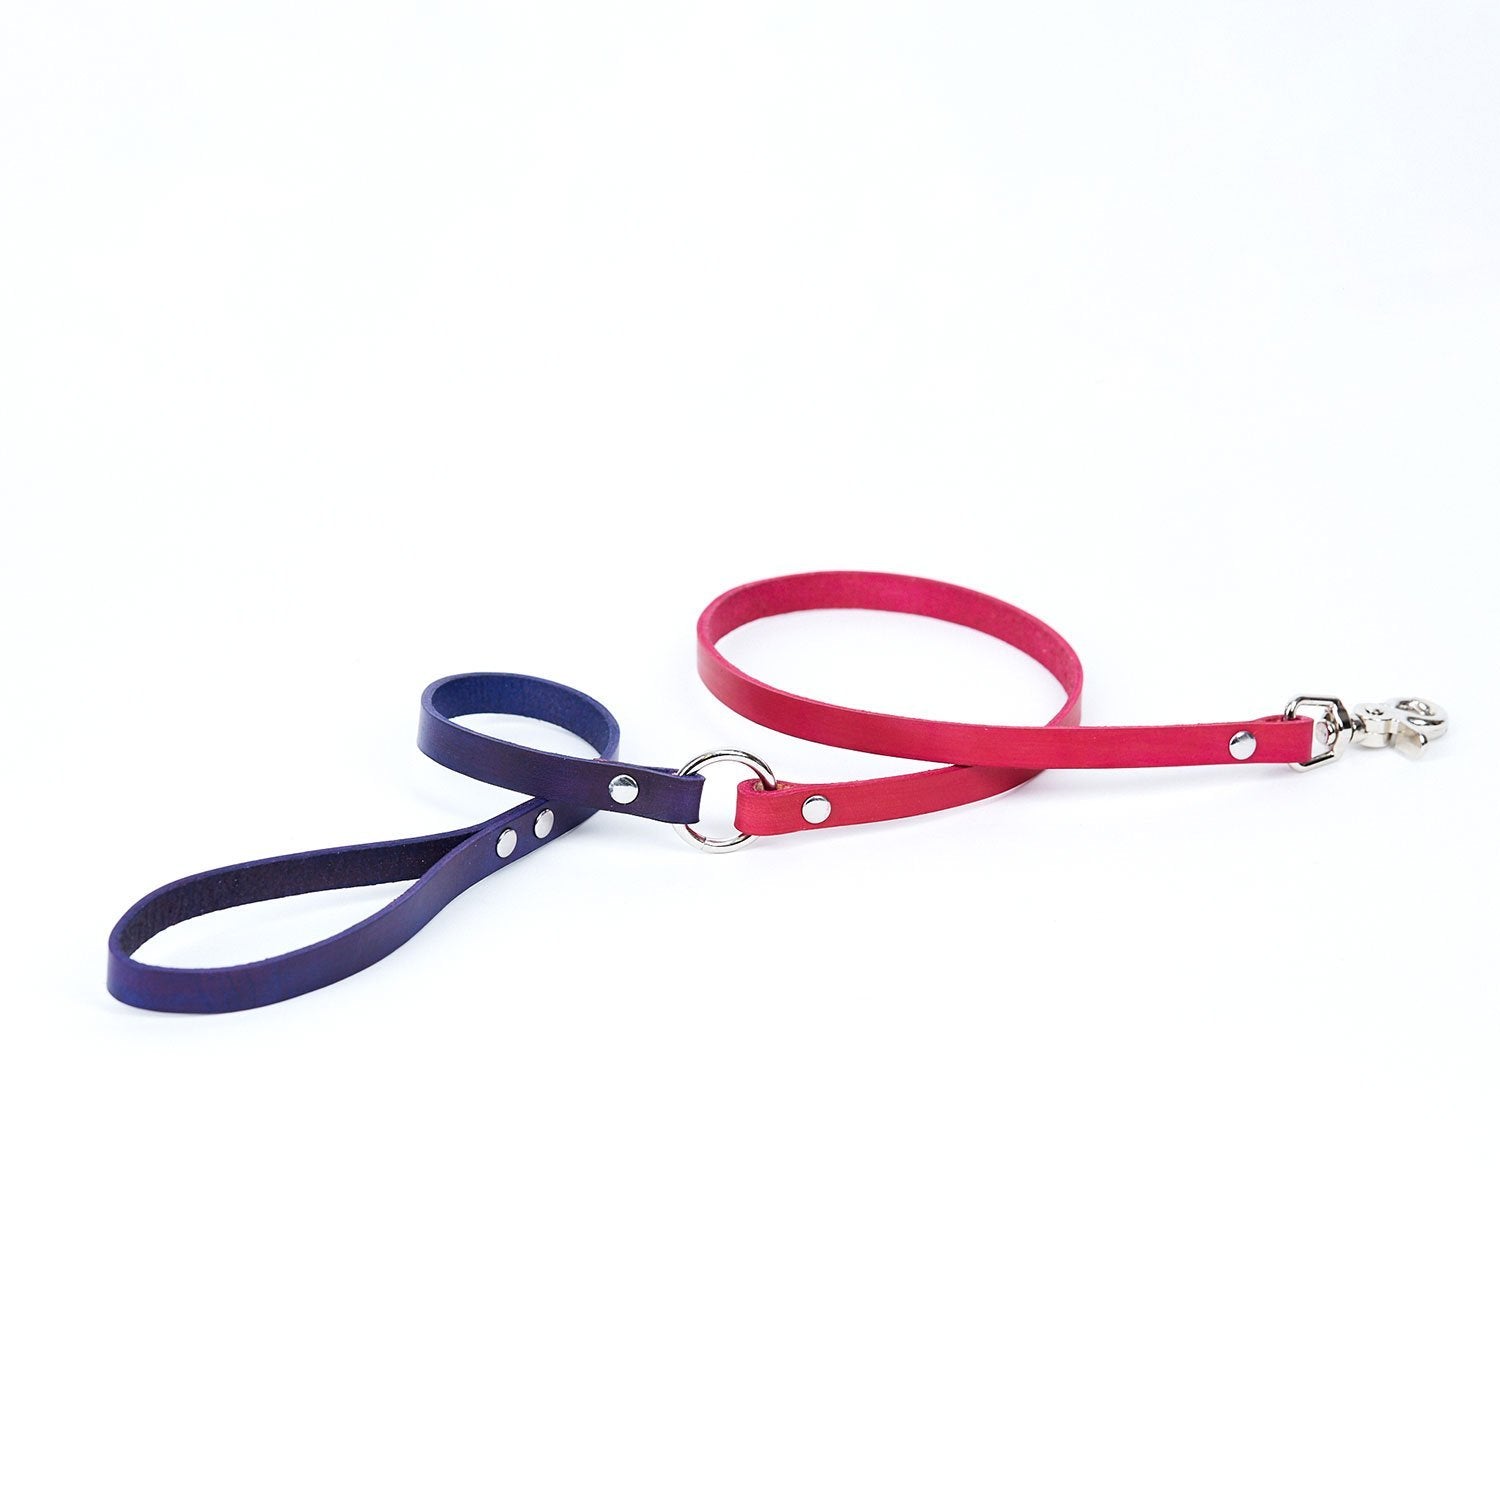 Medium Leather Dog Leash - Available in More Colors